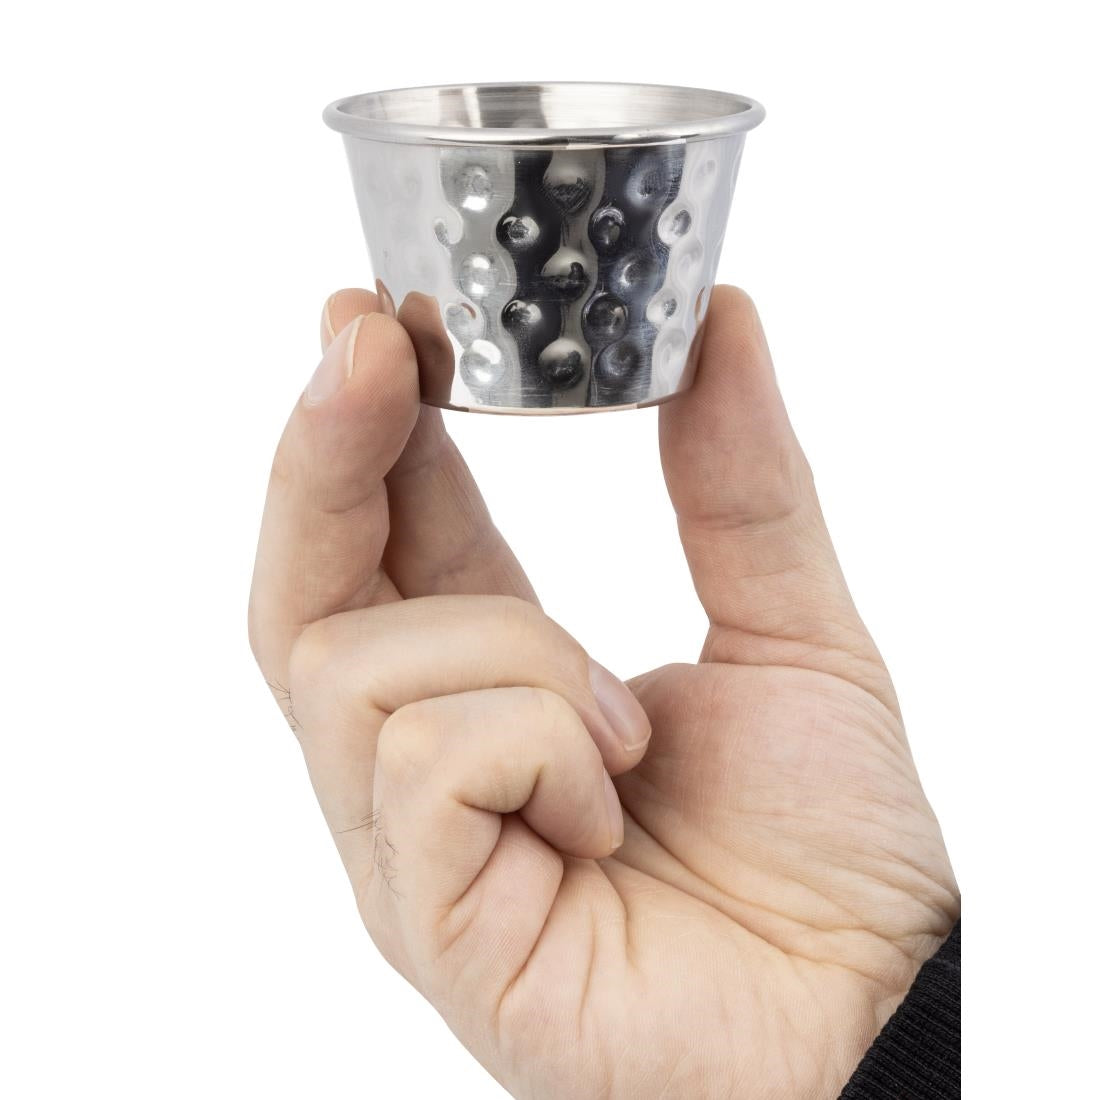 FU289 Olympia Hammered Stainless Steel Sauce Cups 70ml (Pack of 12)